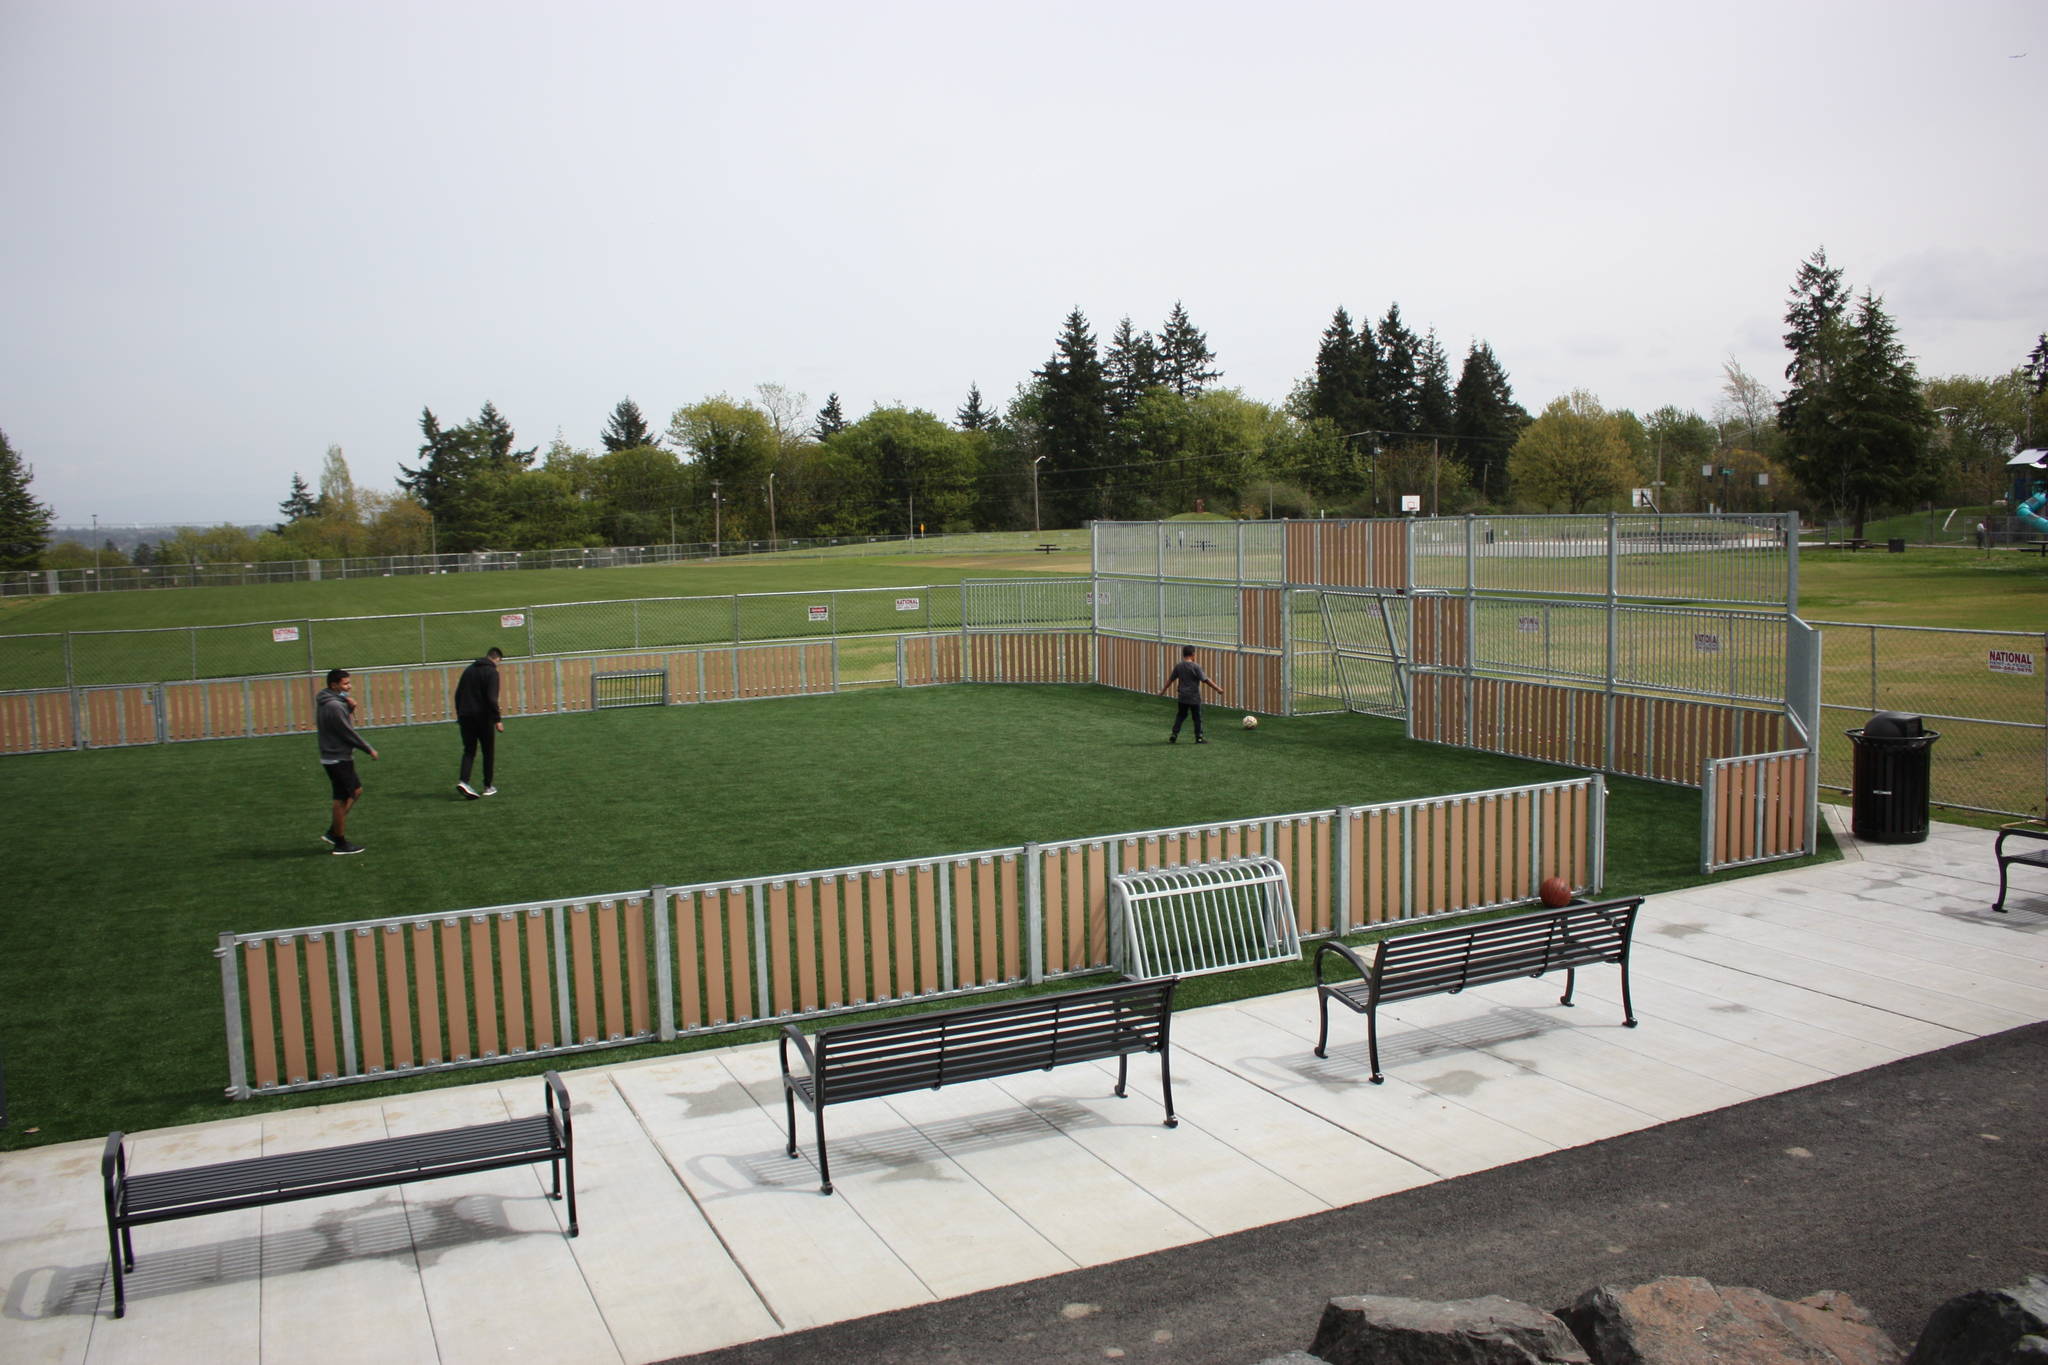 Artificial turf soccer field with fenced-in boundaries. CAMERON SHEPPARD, Sound Publishing